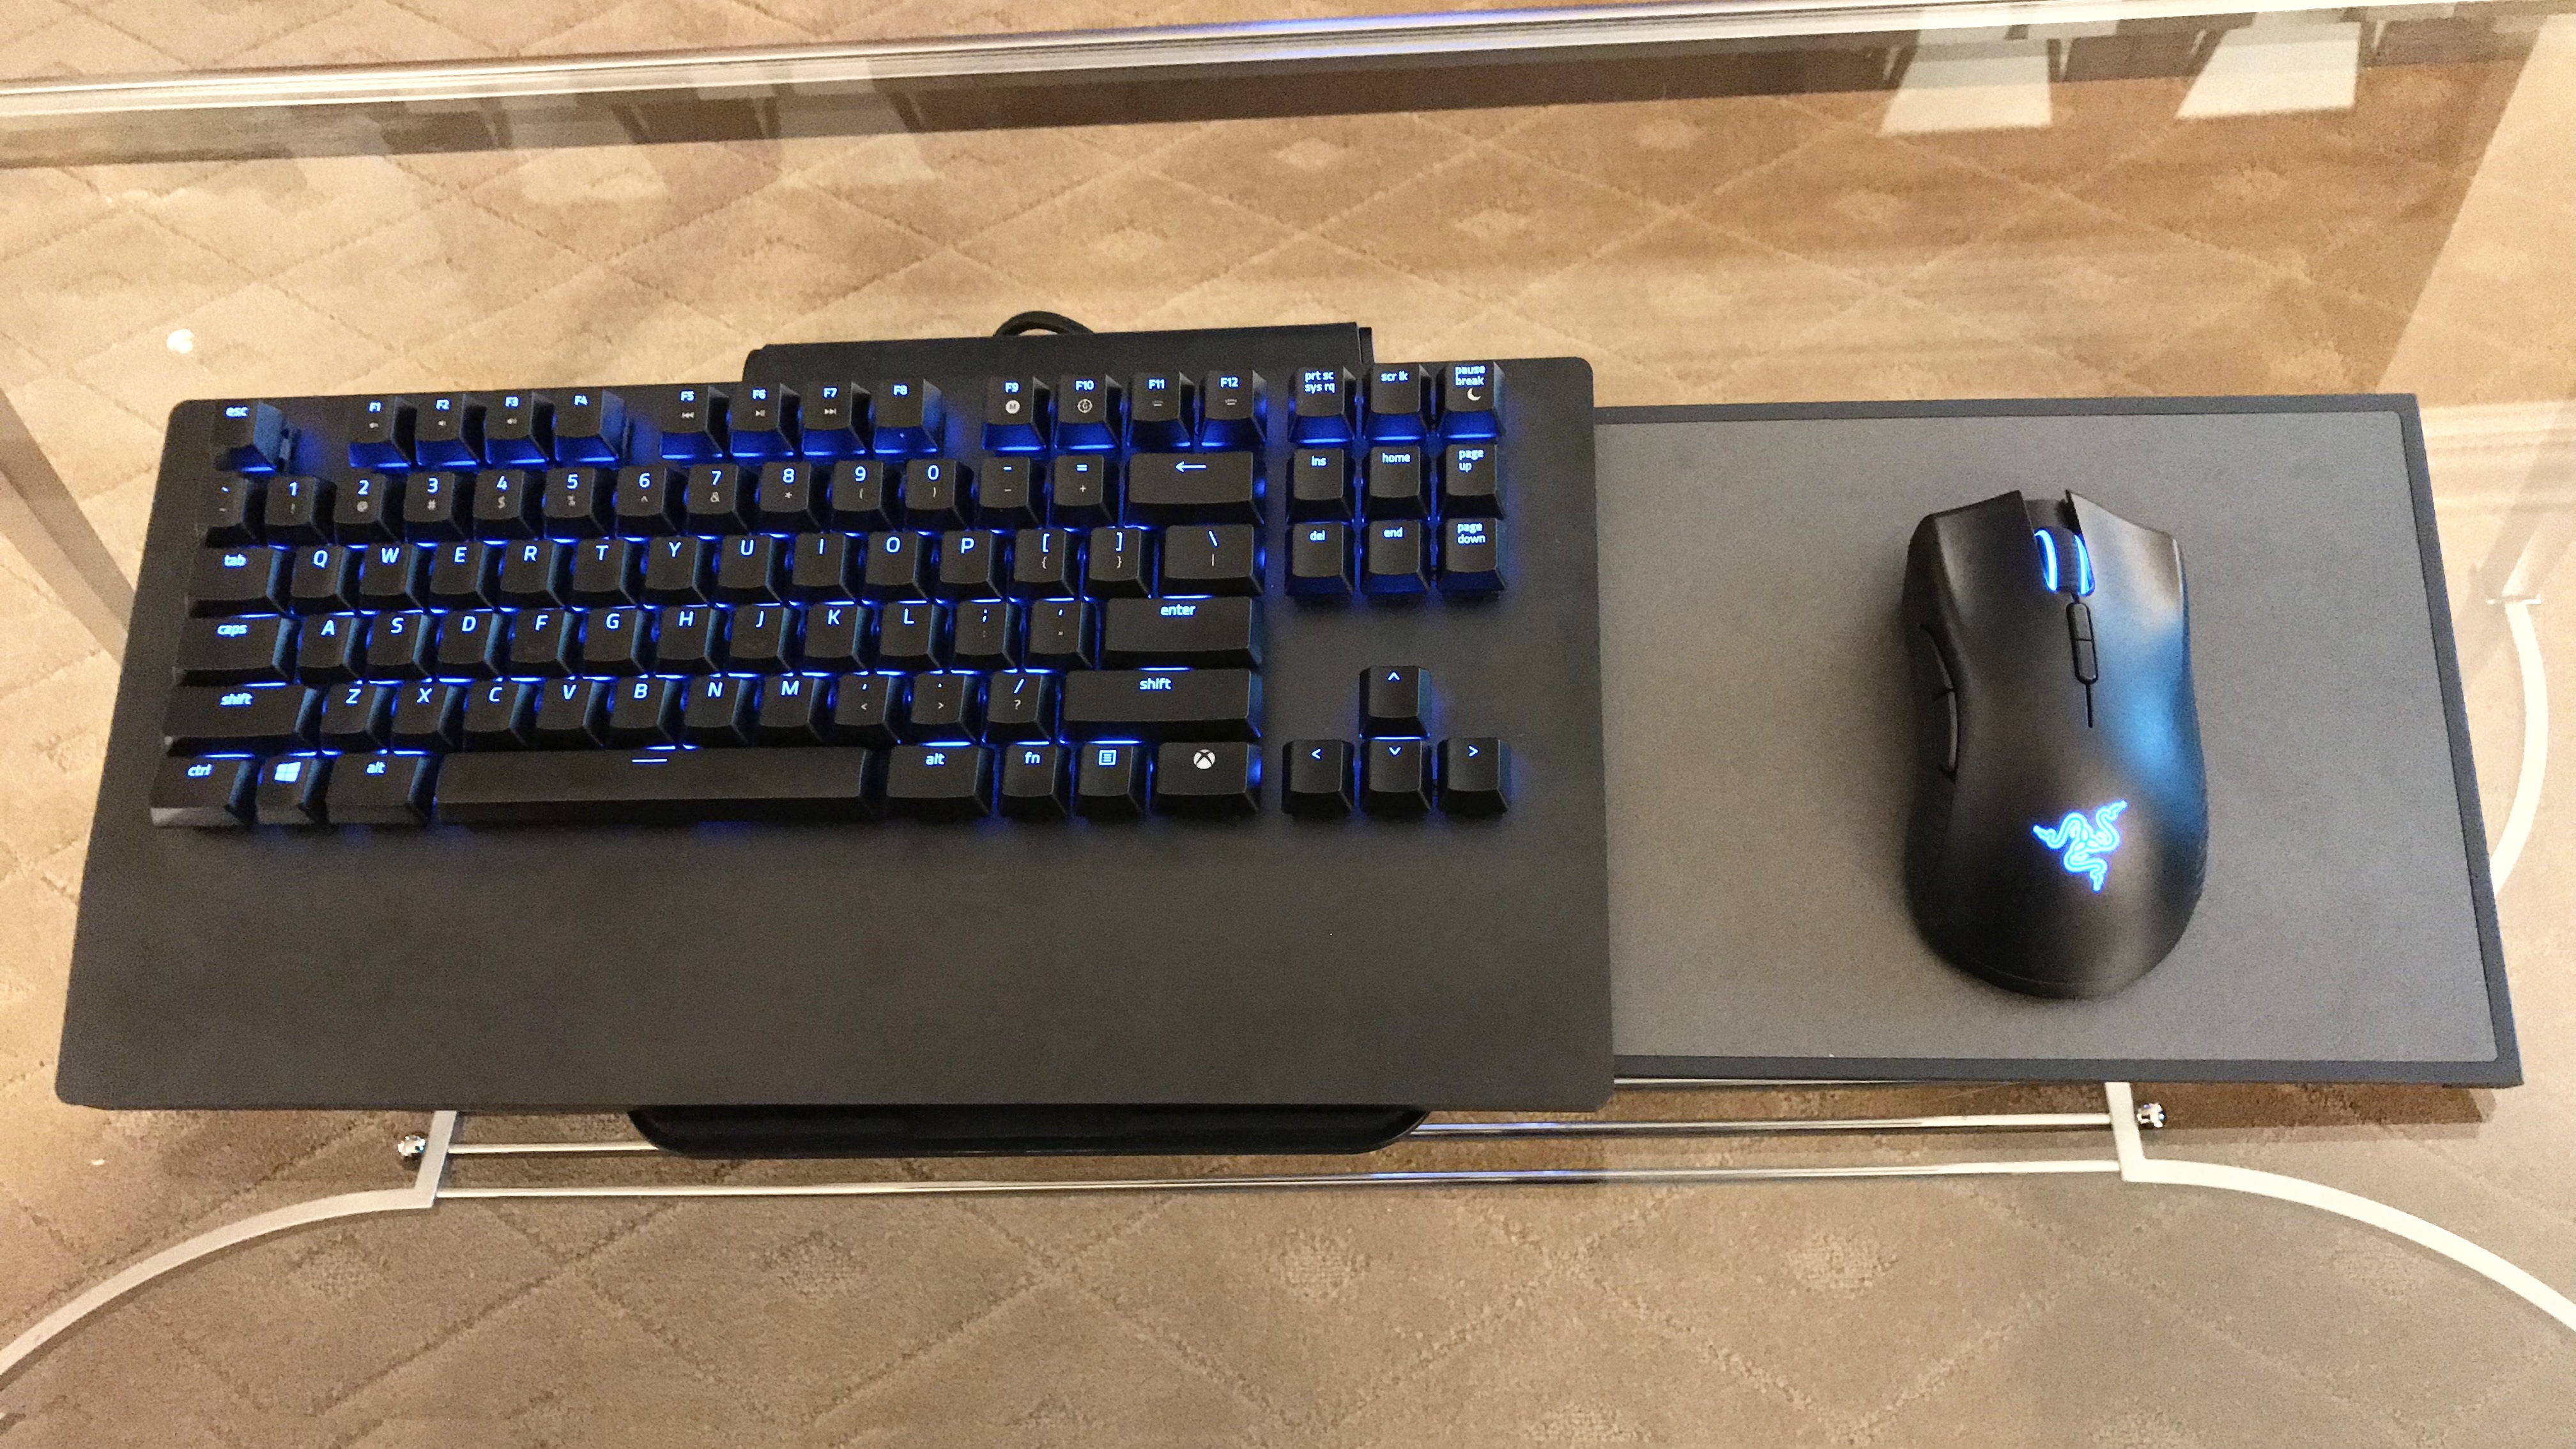 udtryk legation Vejrudsigt Xbox One Wireless Keyboard-Mouse, Razer Turret, Is Almost There - GameSpot